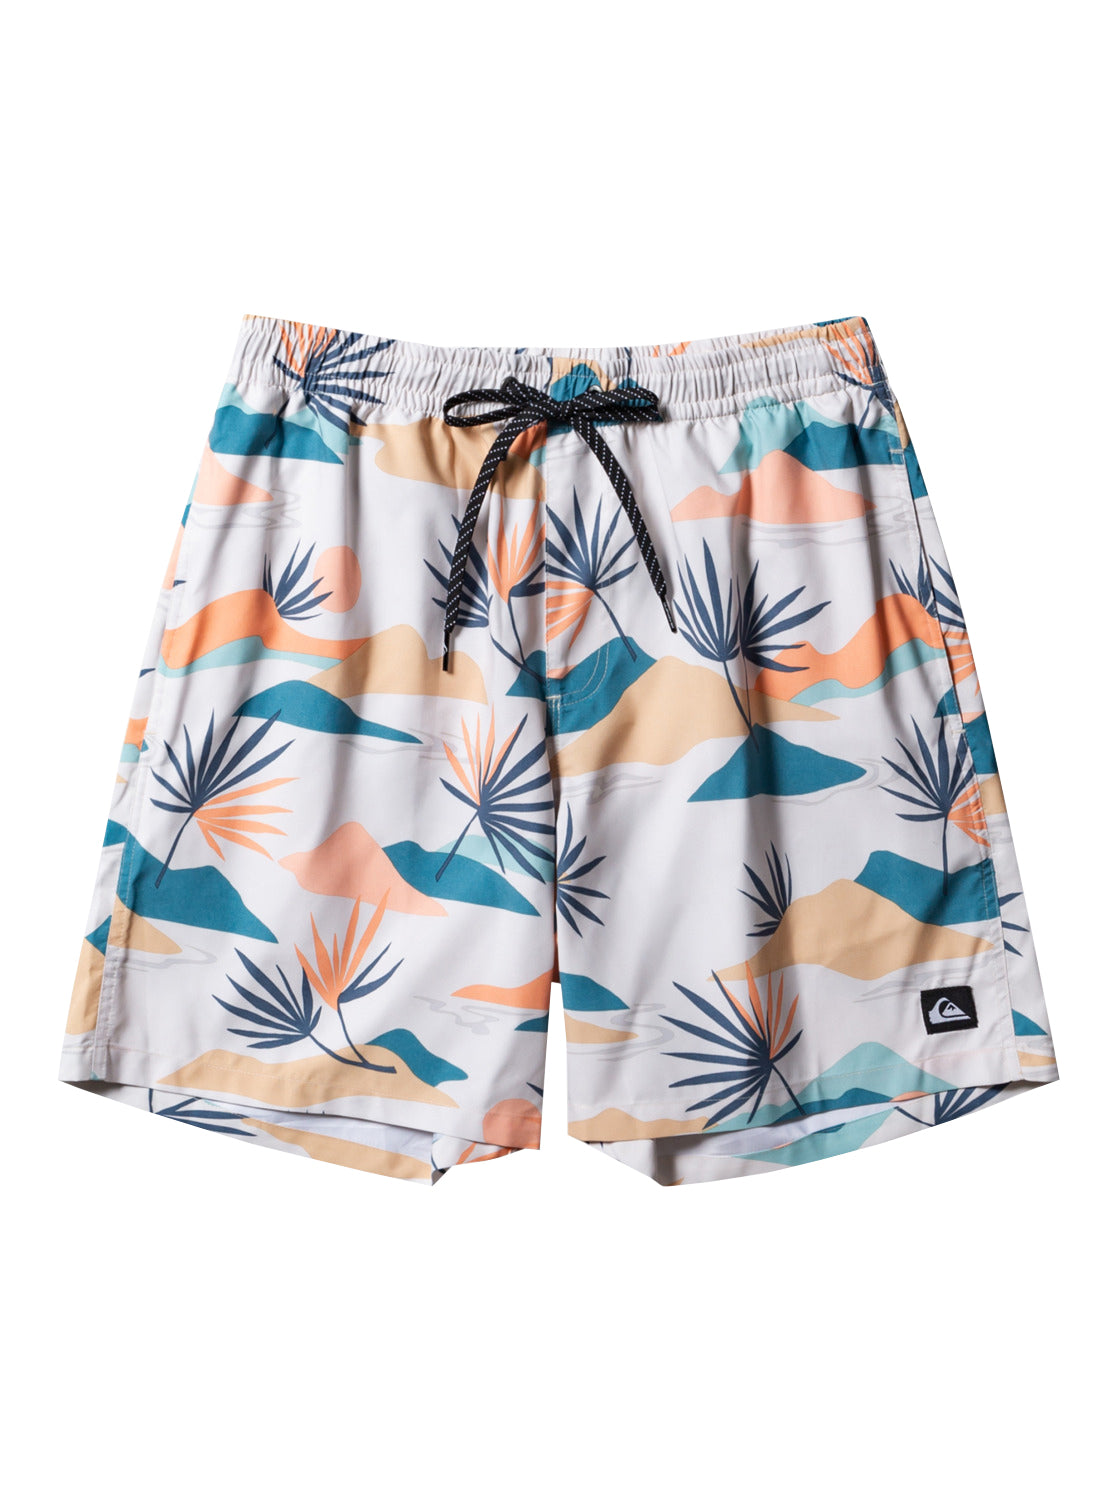 Quiksilver Everyday Jam Mixed Volley 17" Shorts WDW7 M